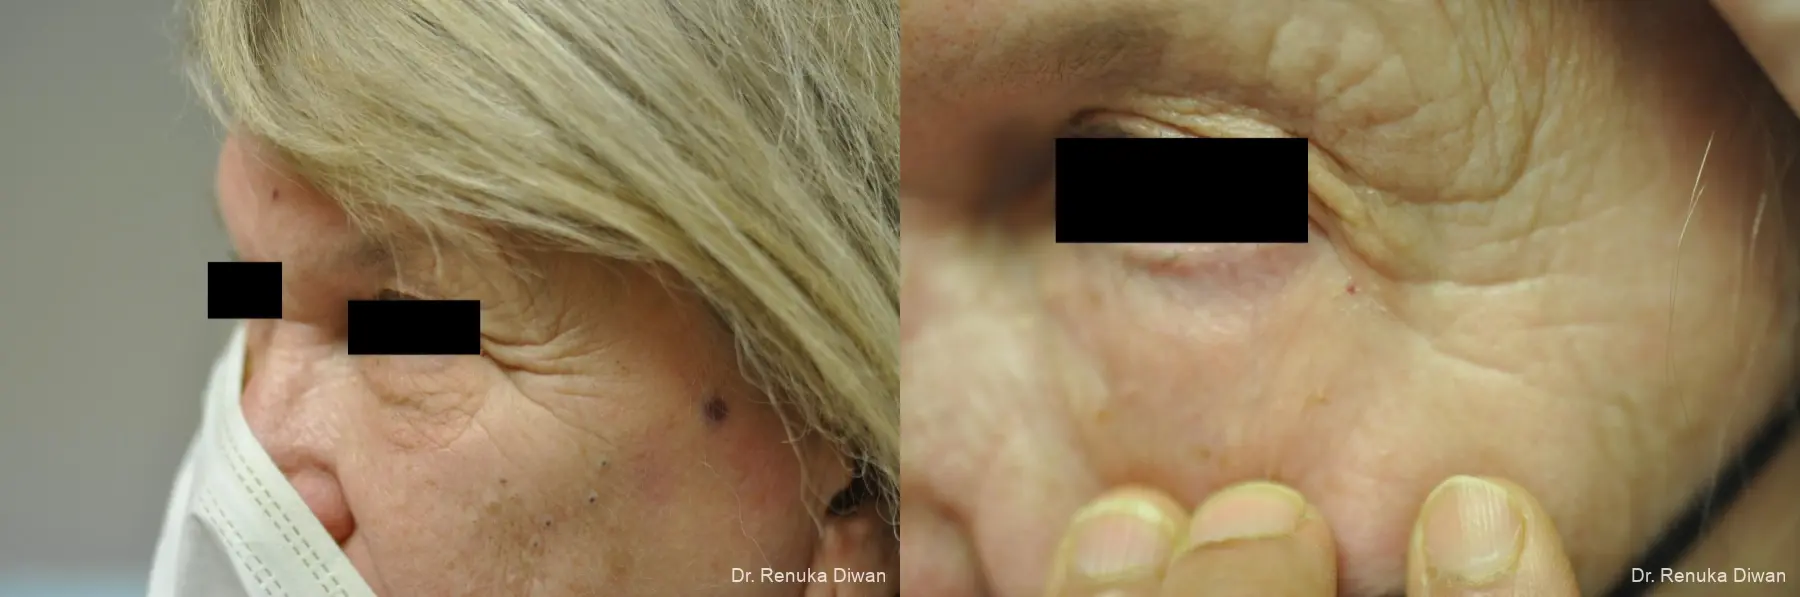 Laser For Veins And Redness: Patient 23 - Before and After 3